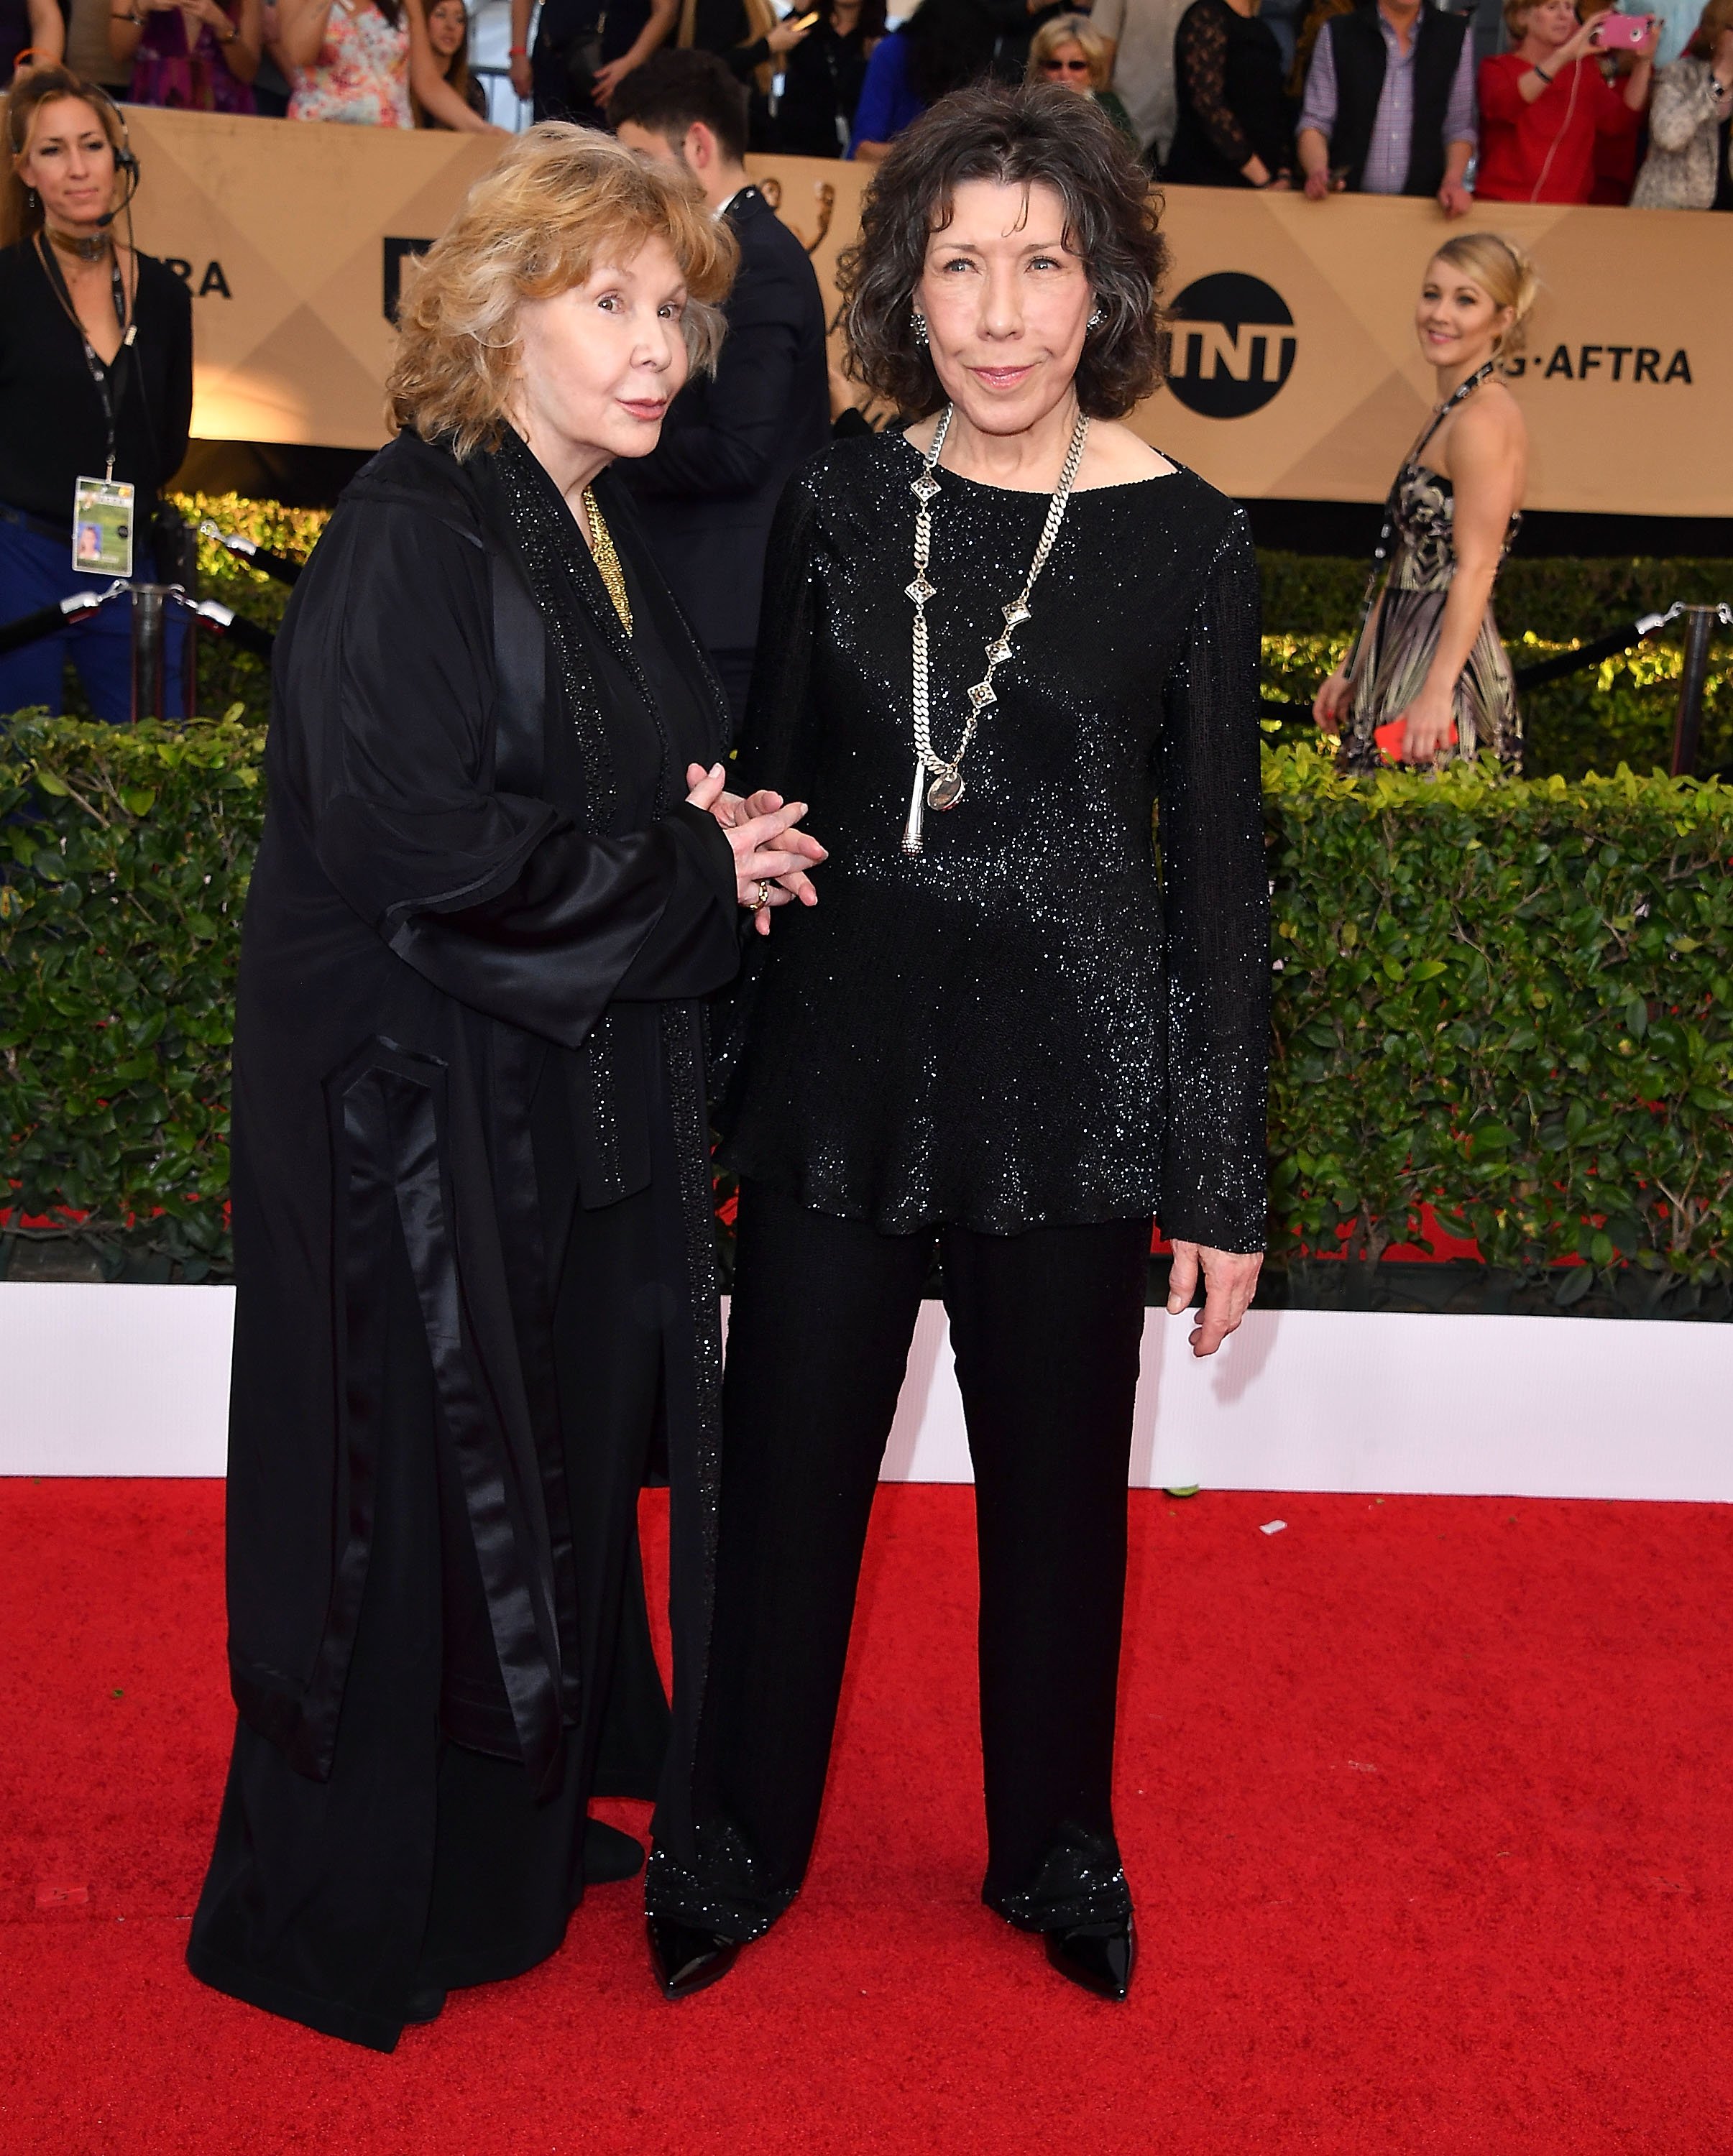 Jane Wagner and Lily Tomlin at the 23rd Annual Screen Actors Guild Awards on January 29, 2017, in Los Angeles, California. | Source: Steve Granitz/WireImage/Getty Images